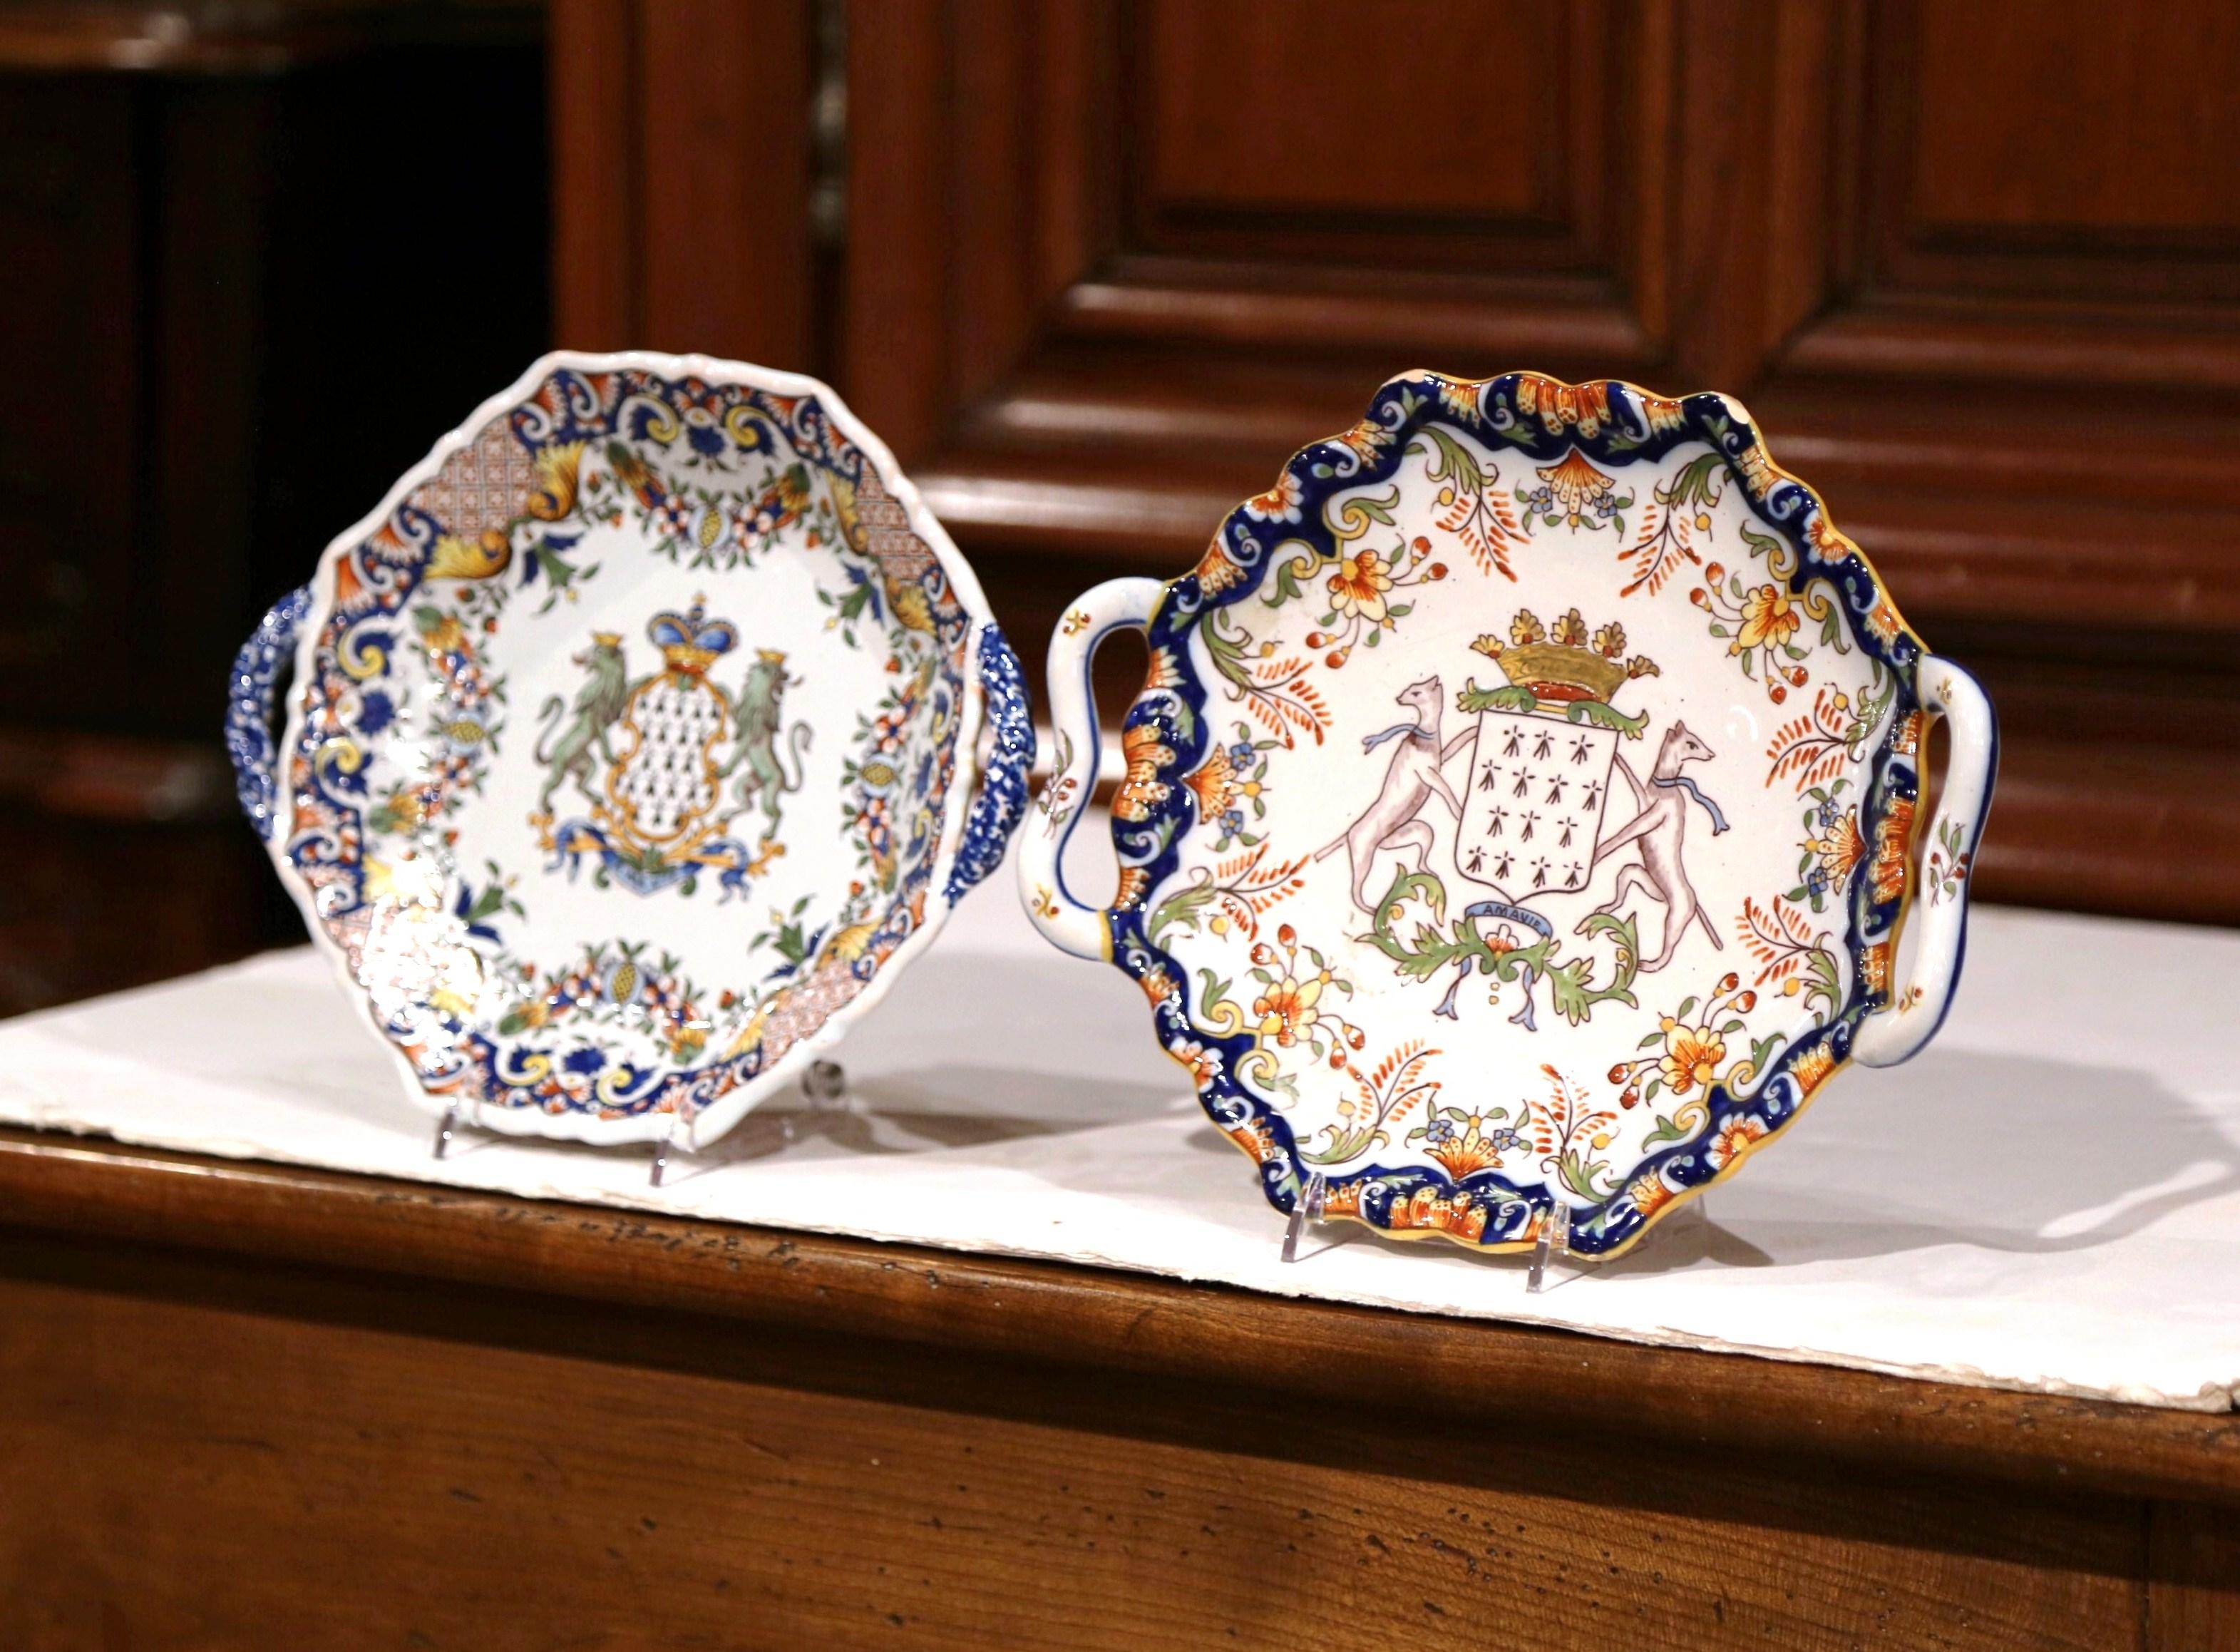 Decorate a shelf or a wall with these colorful antique decorative plates from Brittany, France. Crafted circa 1930, each faience plate has handles and features a hand painted centre crest. The plates are further embellished with floral decor around